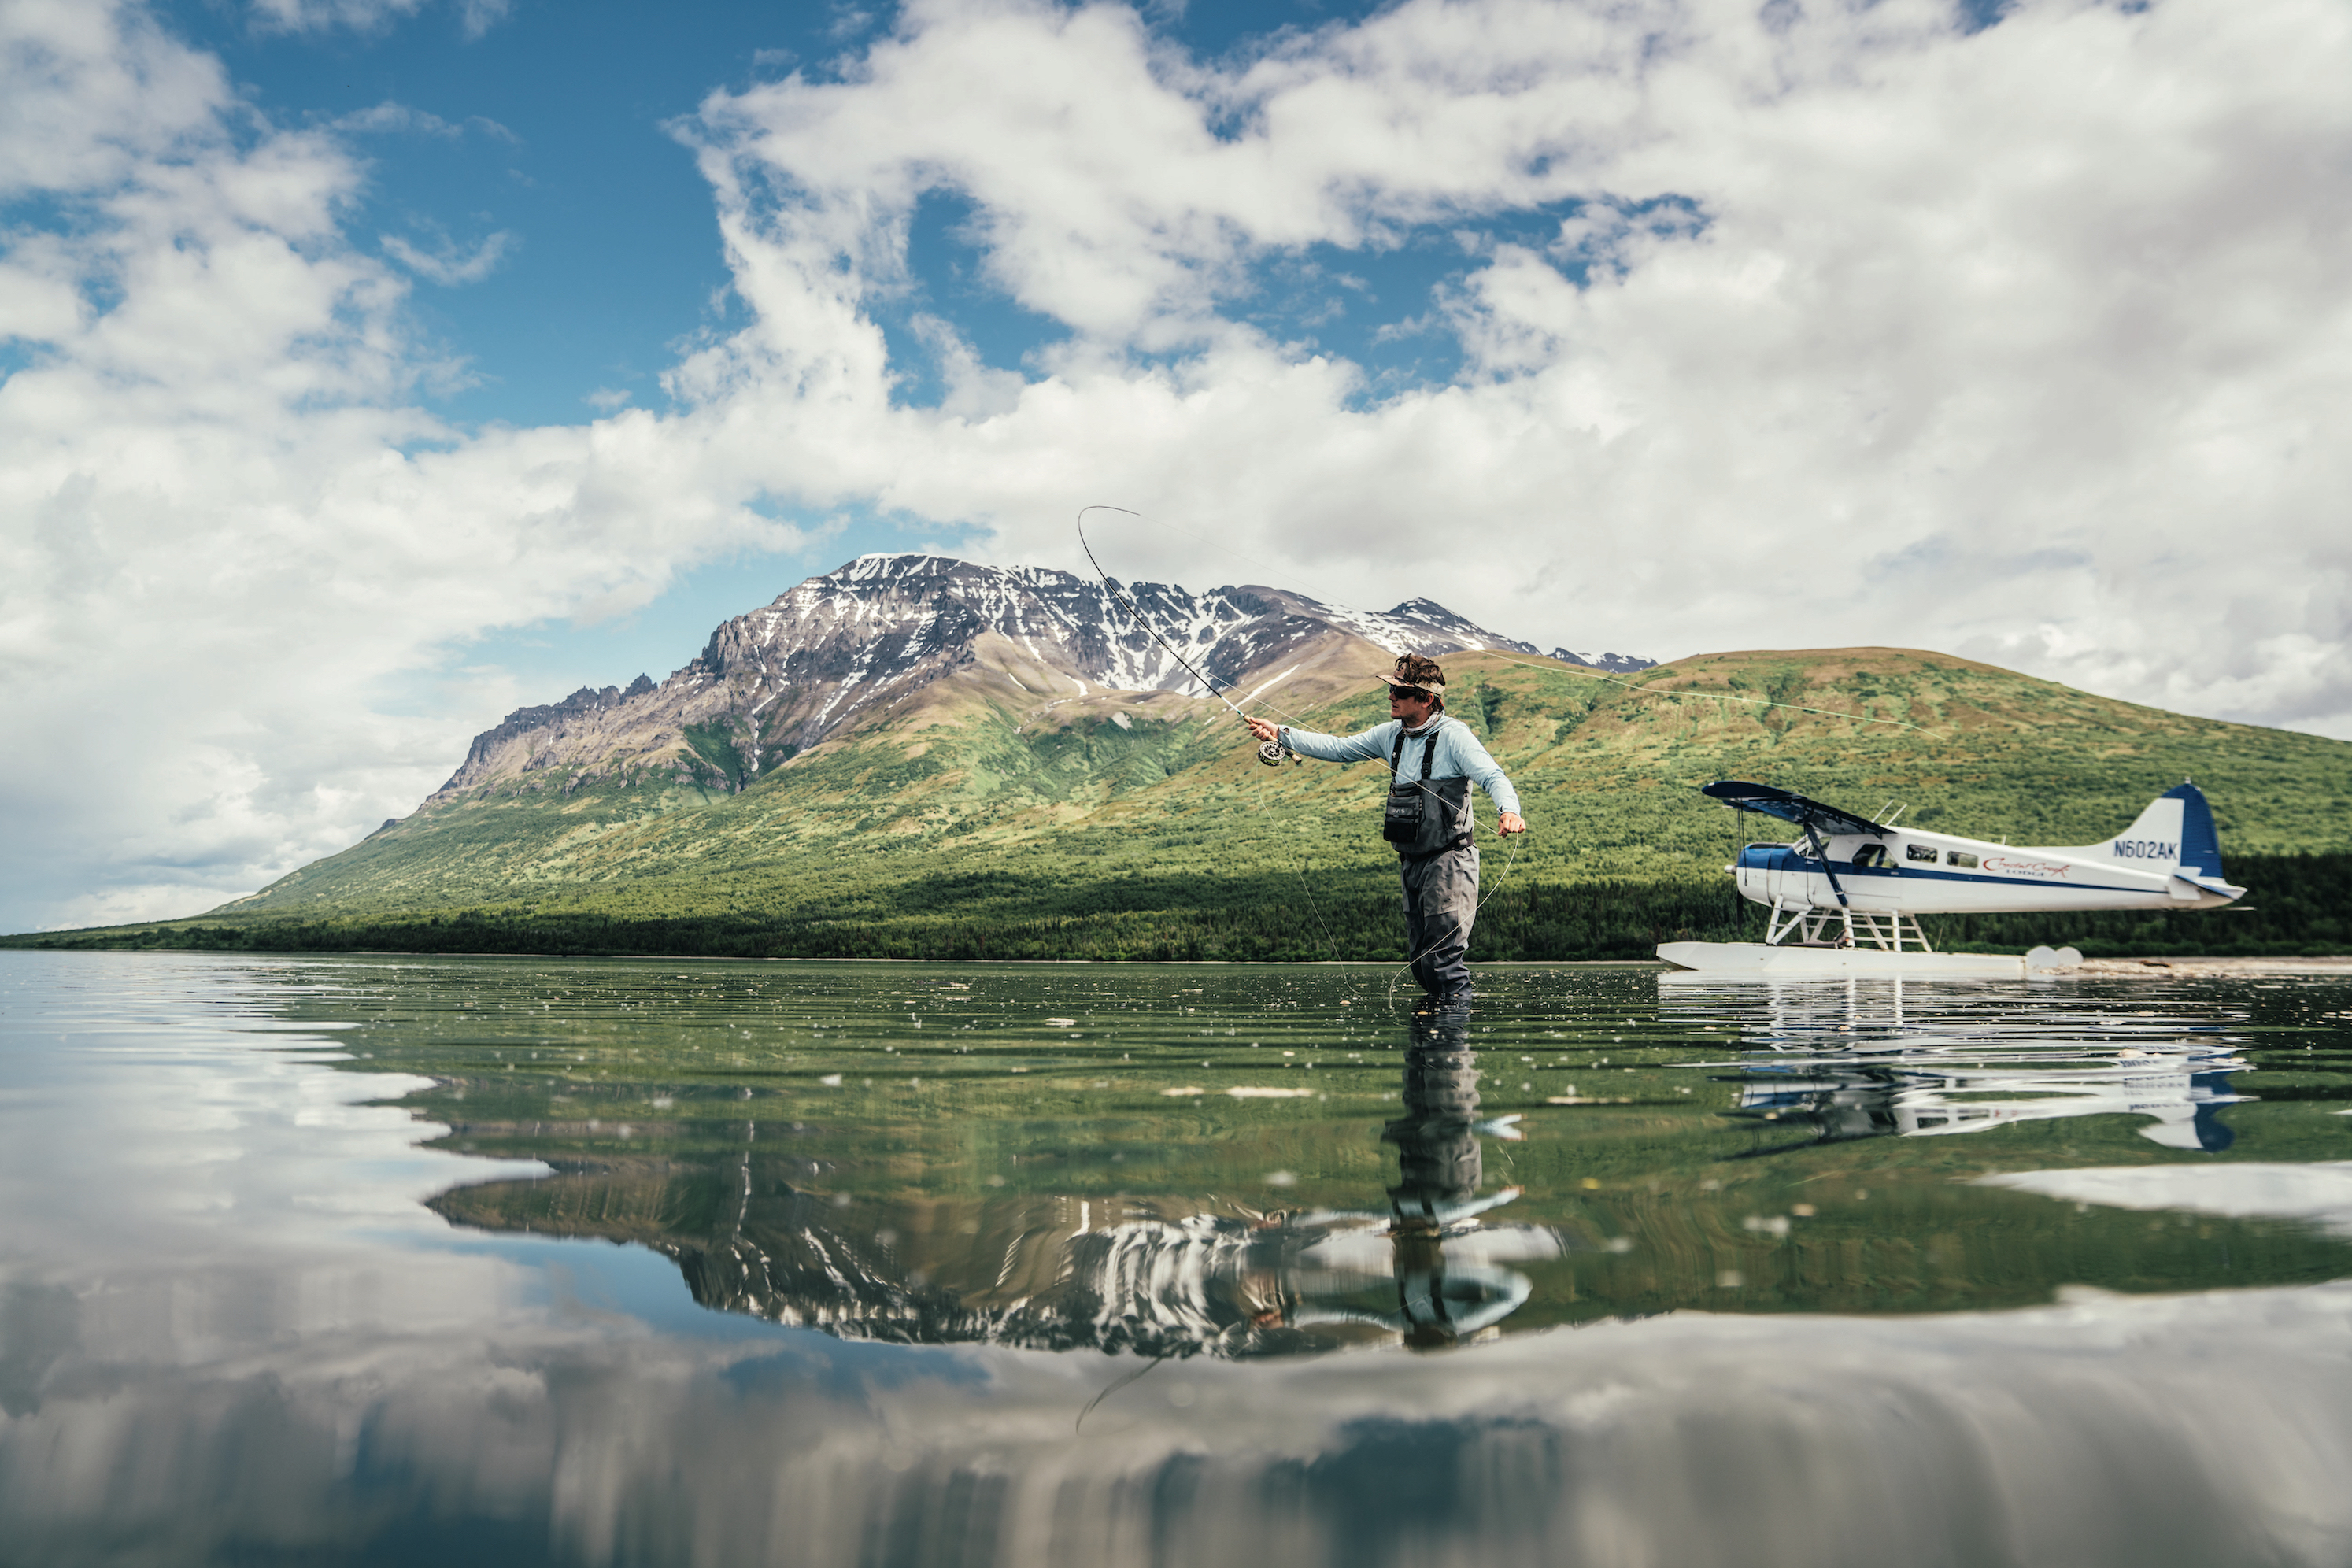 A man in waders casts a fly in water. Behind him there is a bush plane in the water and a mountain. The mountain landscape reflects in the water